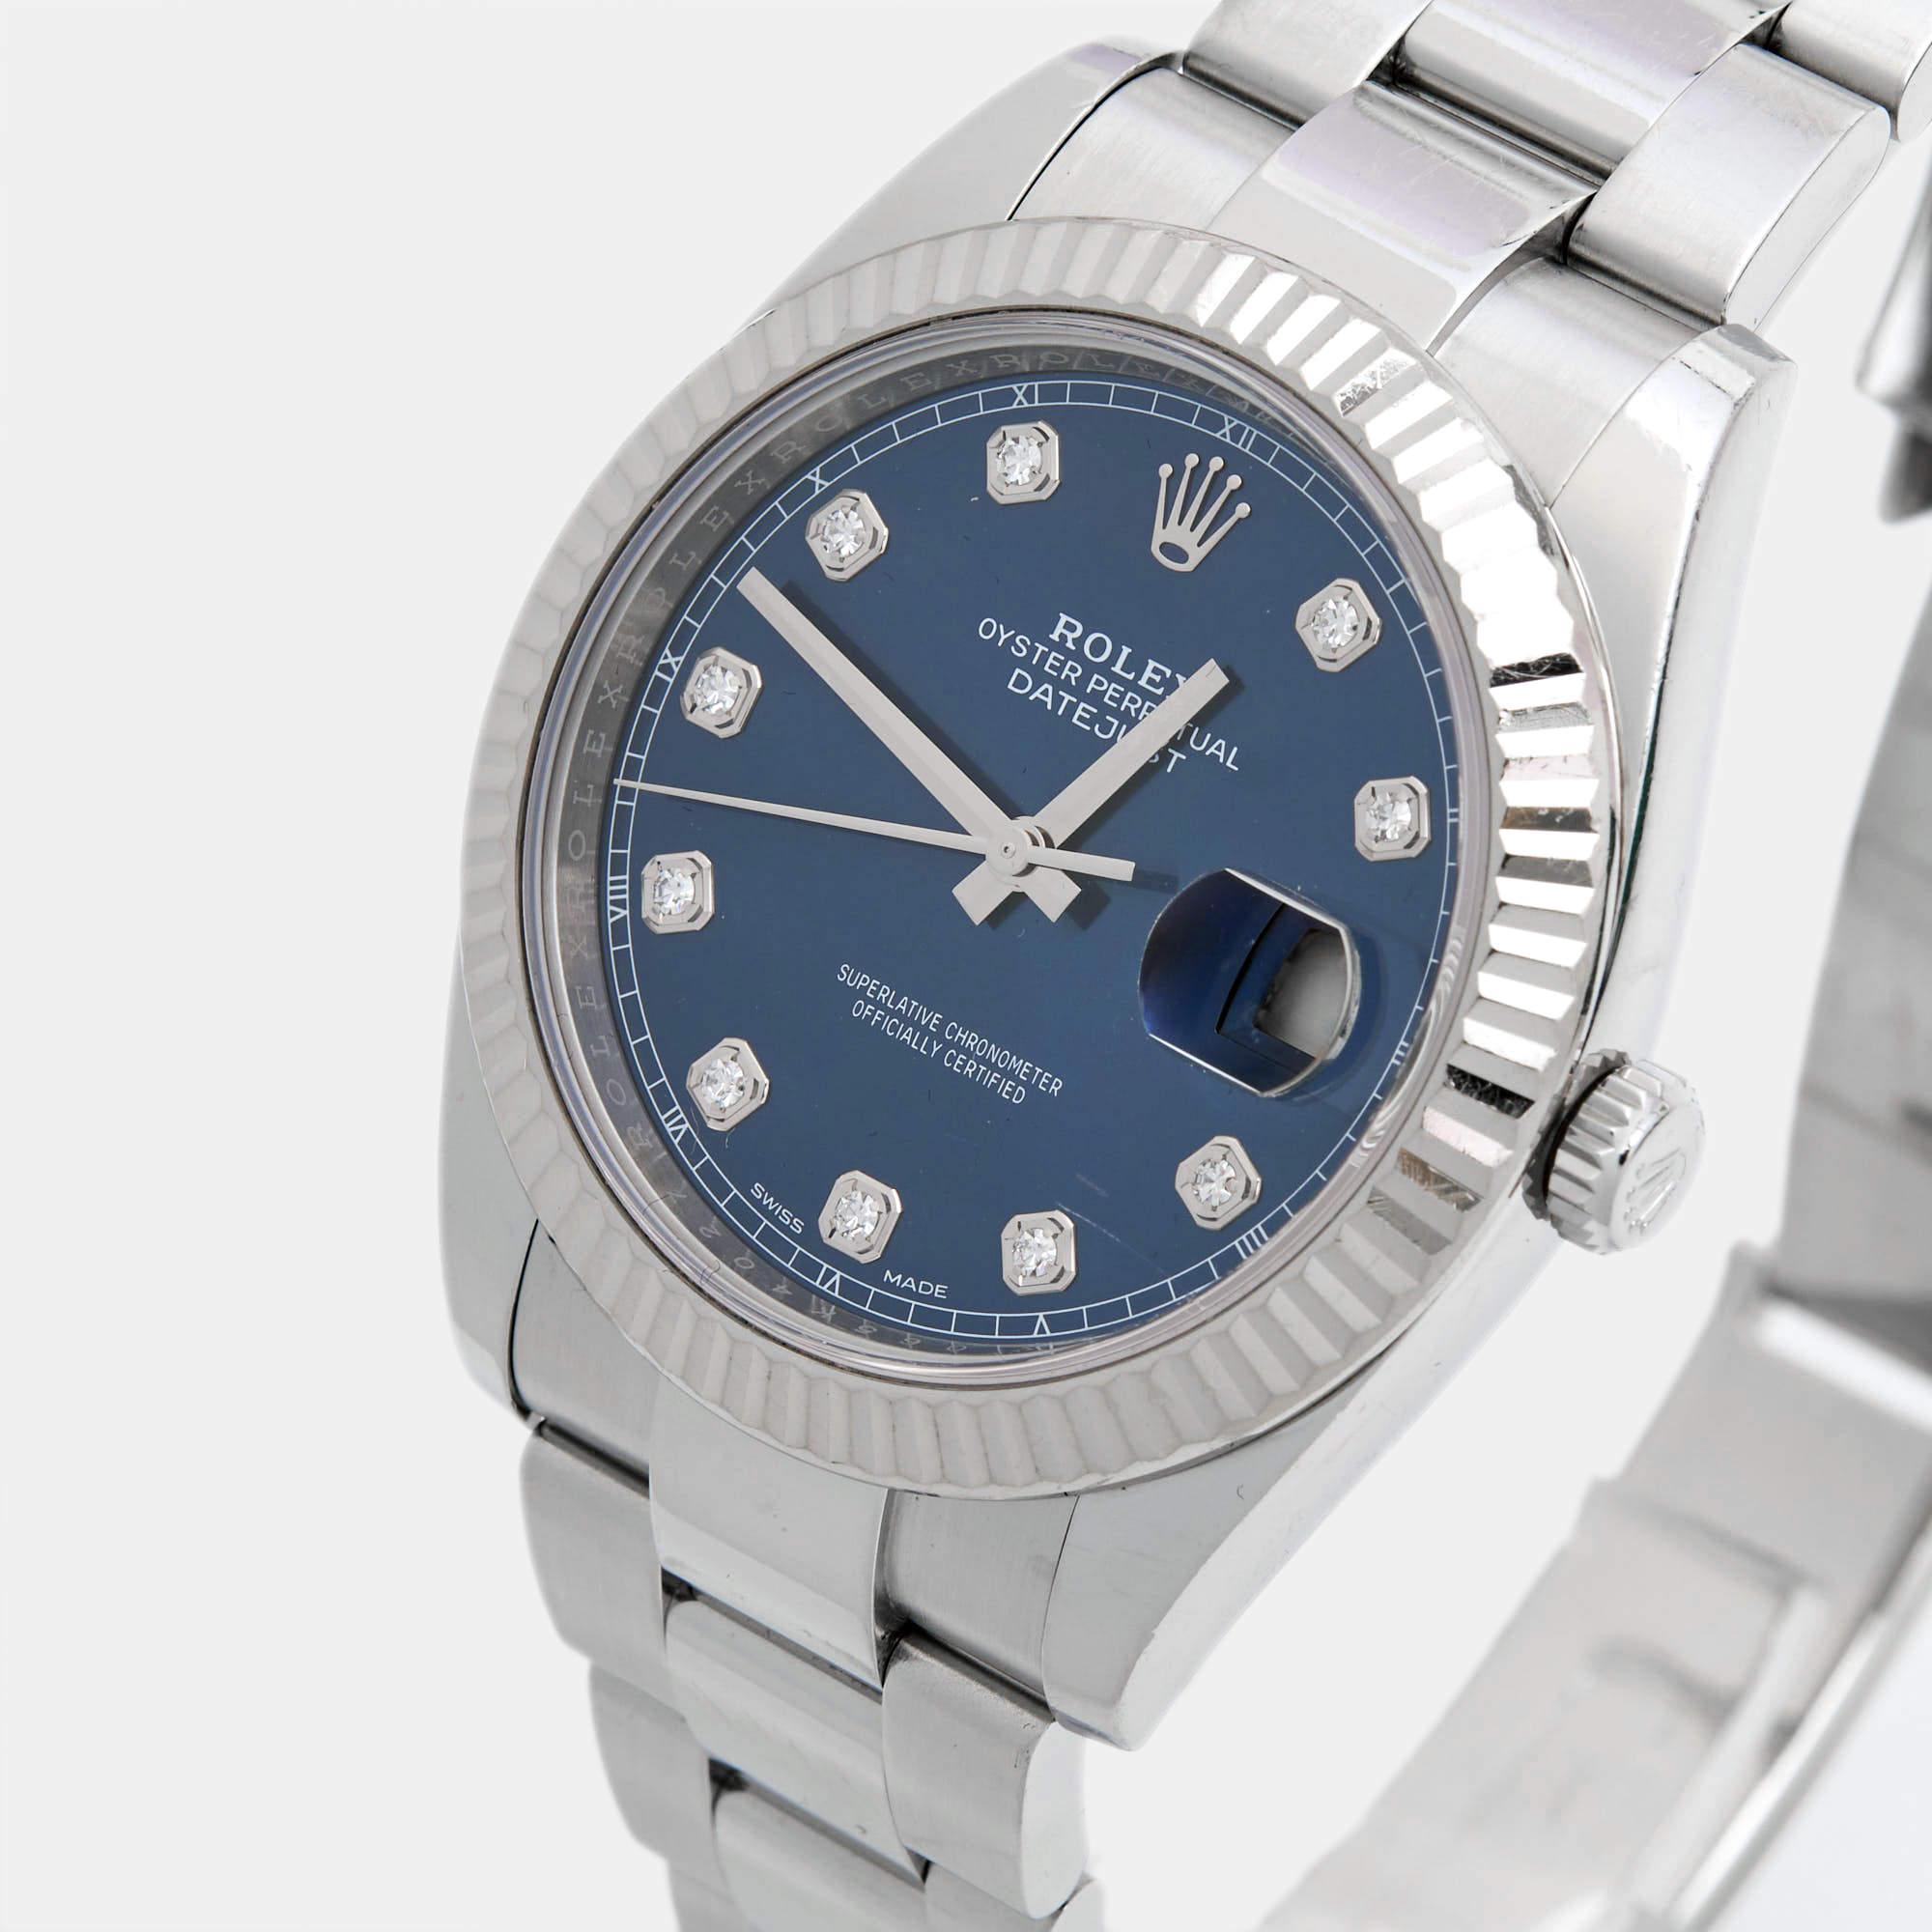 This beautiful Rolex Datejust for men will be a fine investment. Crafted using oystersteel and 18k white gold, the automatic watch features a blue dial set with diamond markers, a date window, and three hands. Iconic, comfortable, and simply classy,